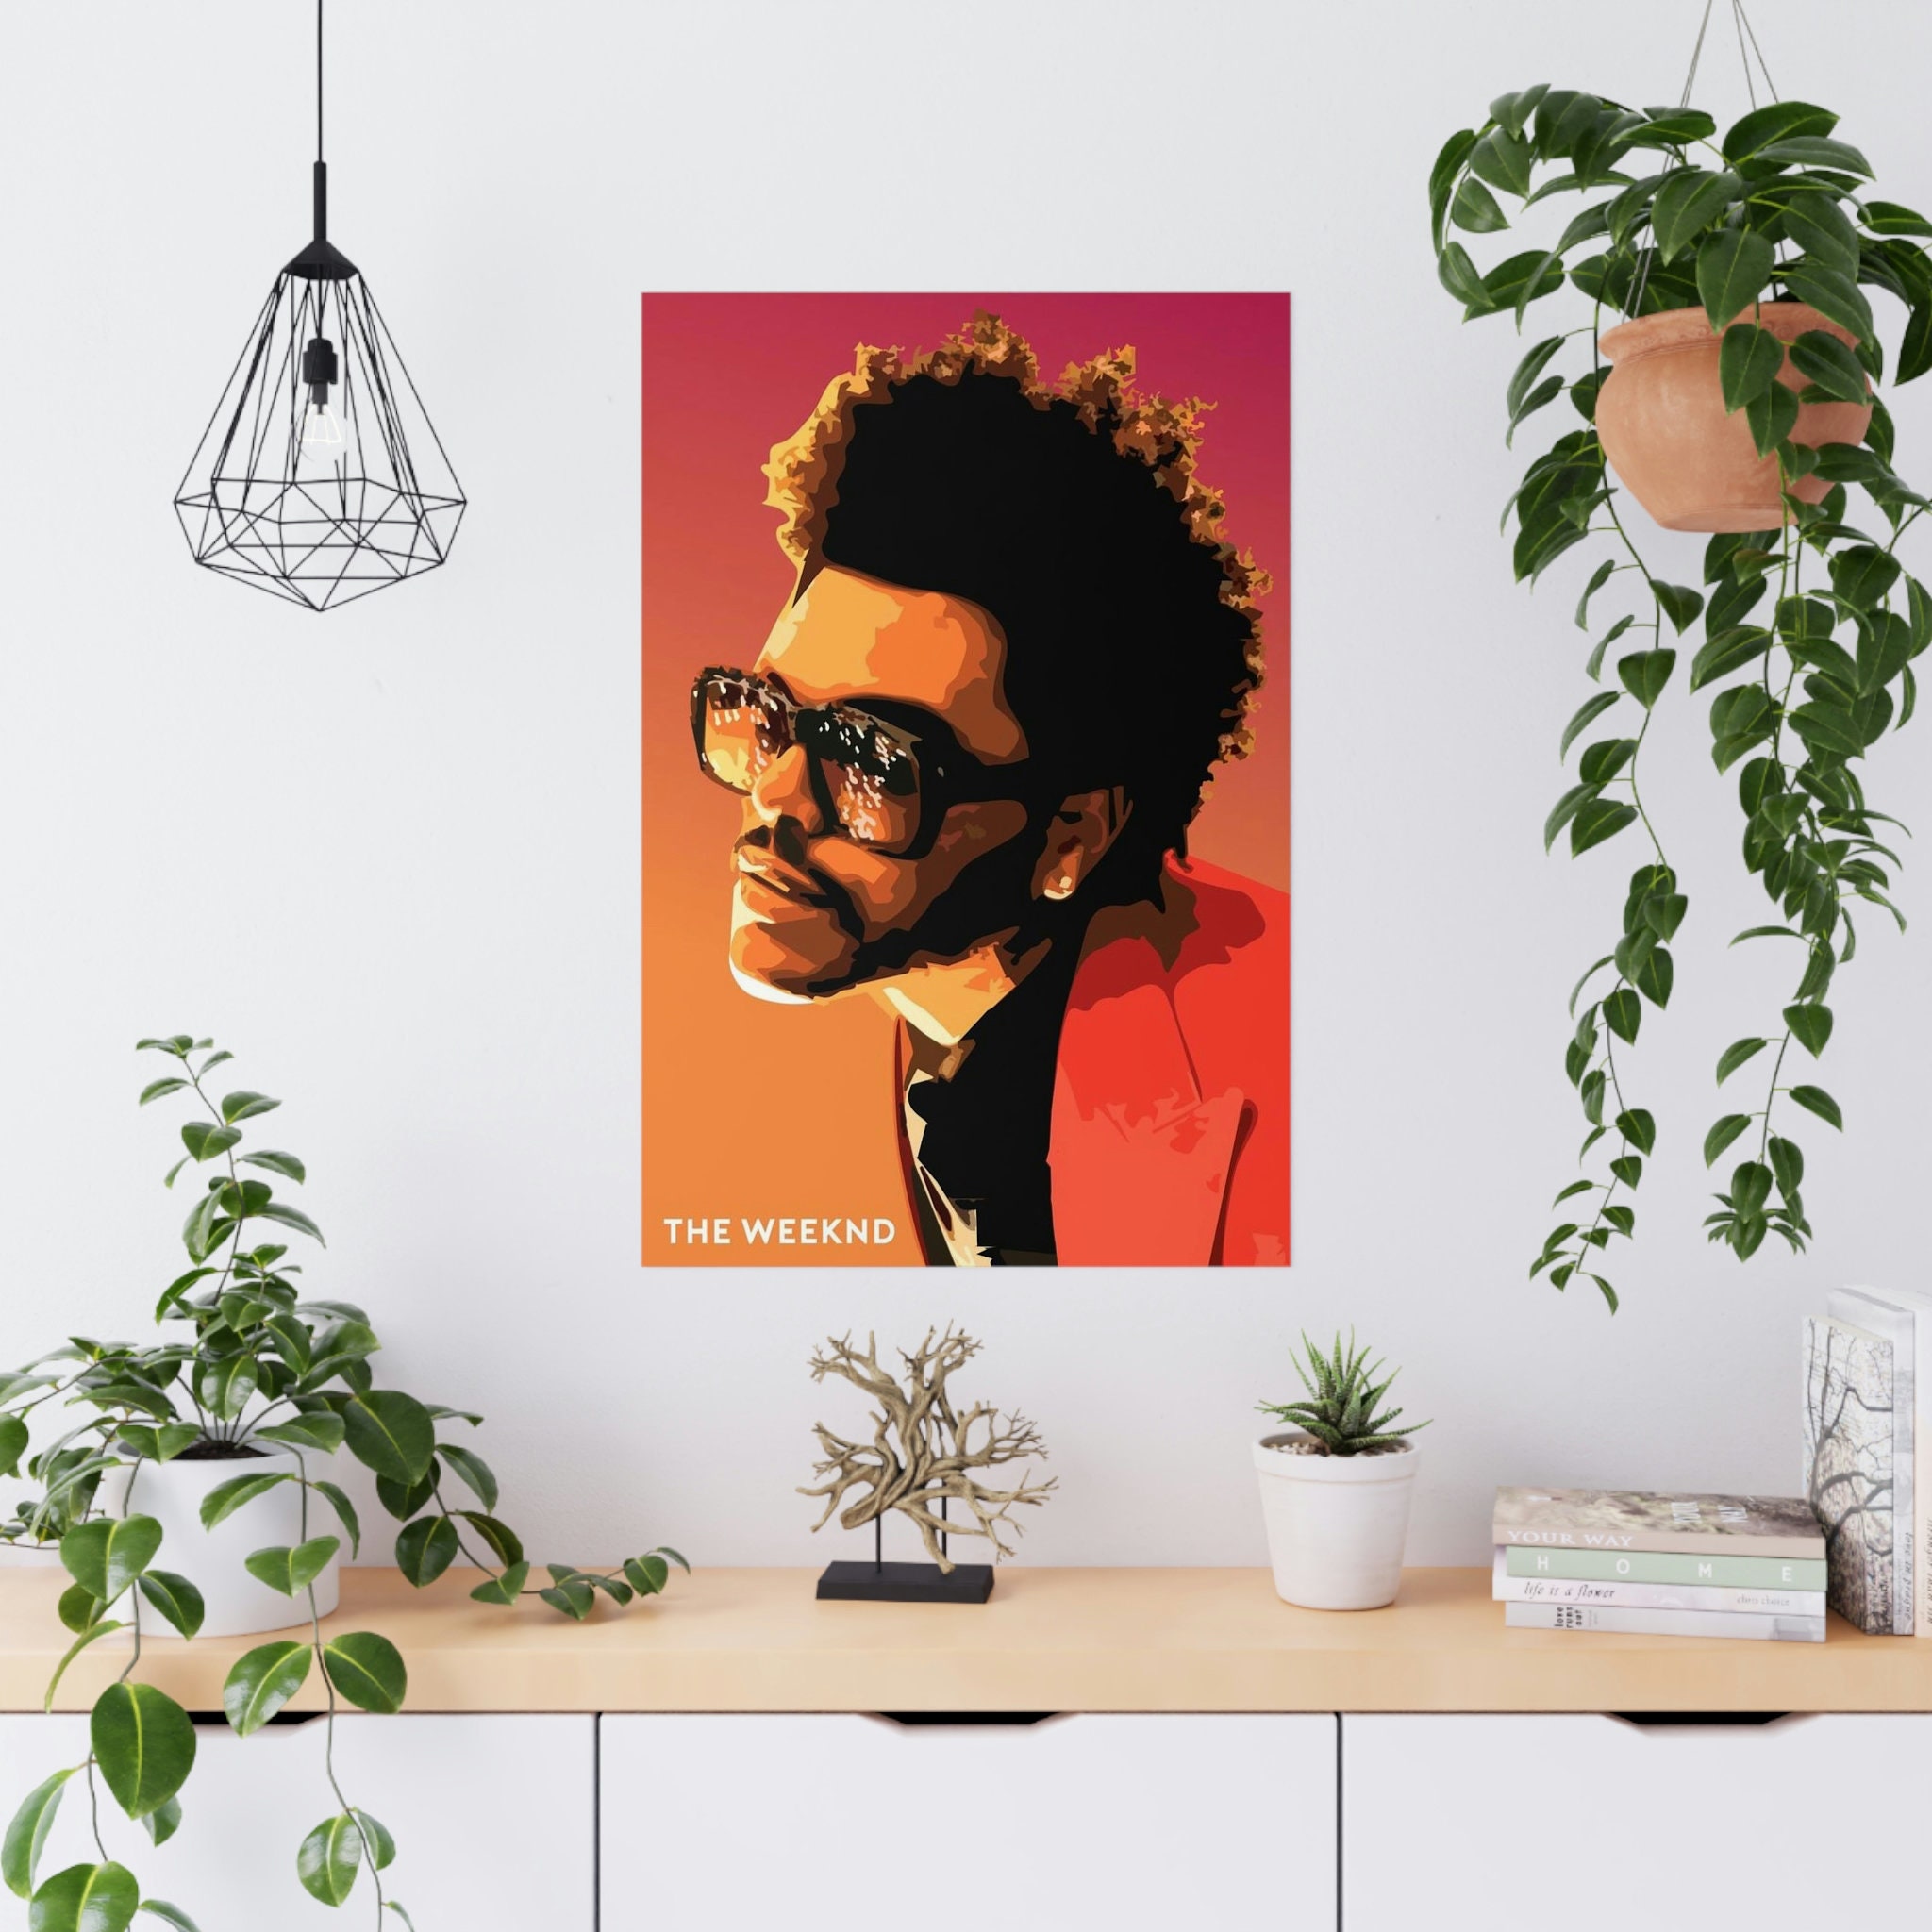 The Weeknd Poster, The Weeknd Inspired Poster, Weekend Floating head  Minimalist Modern Art Print, Poster Print Wall Art, Home Decor - Printiment